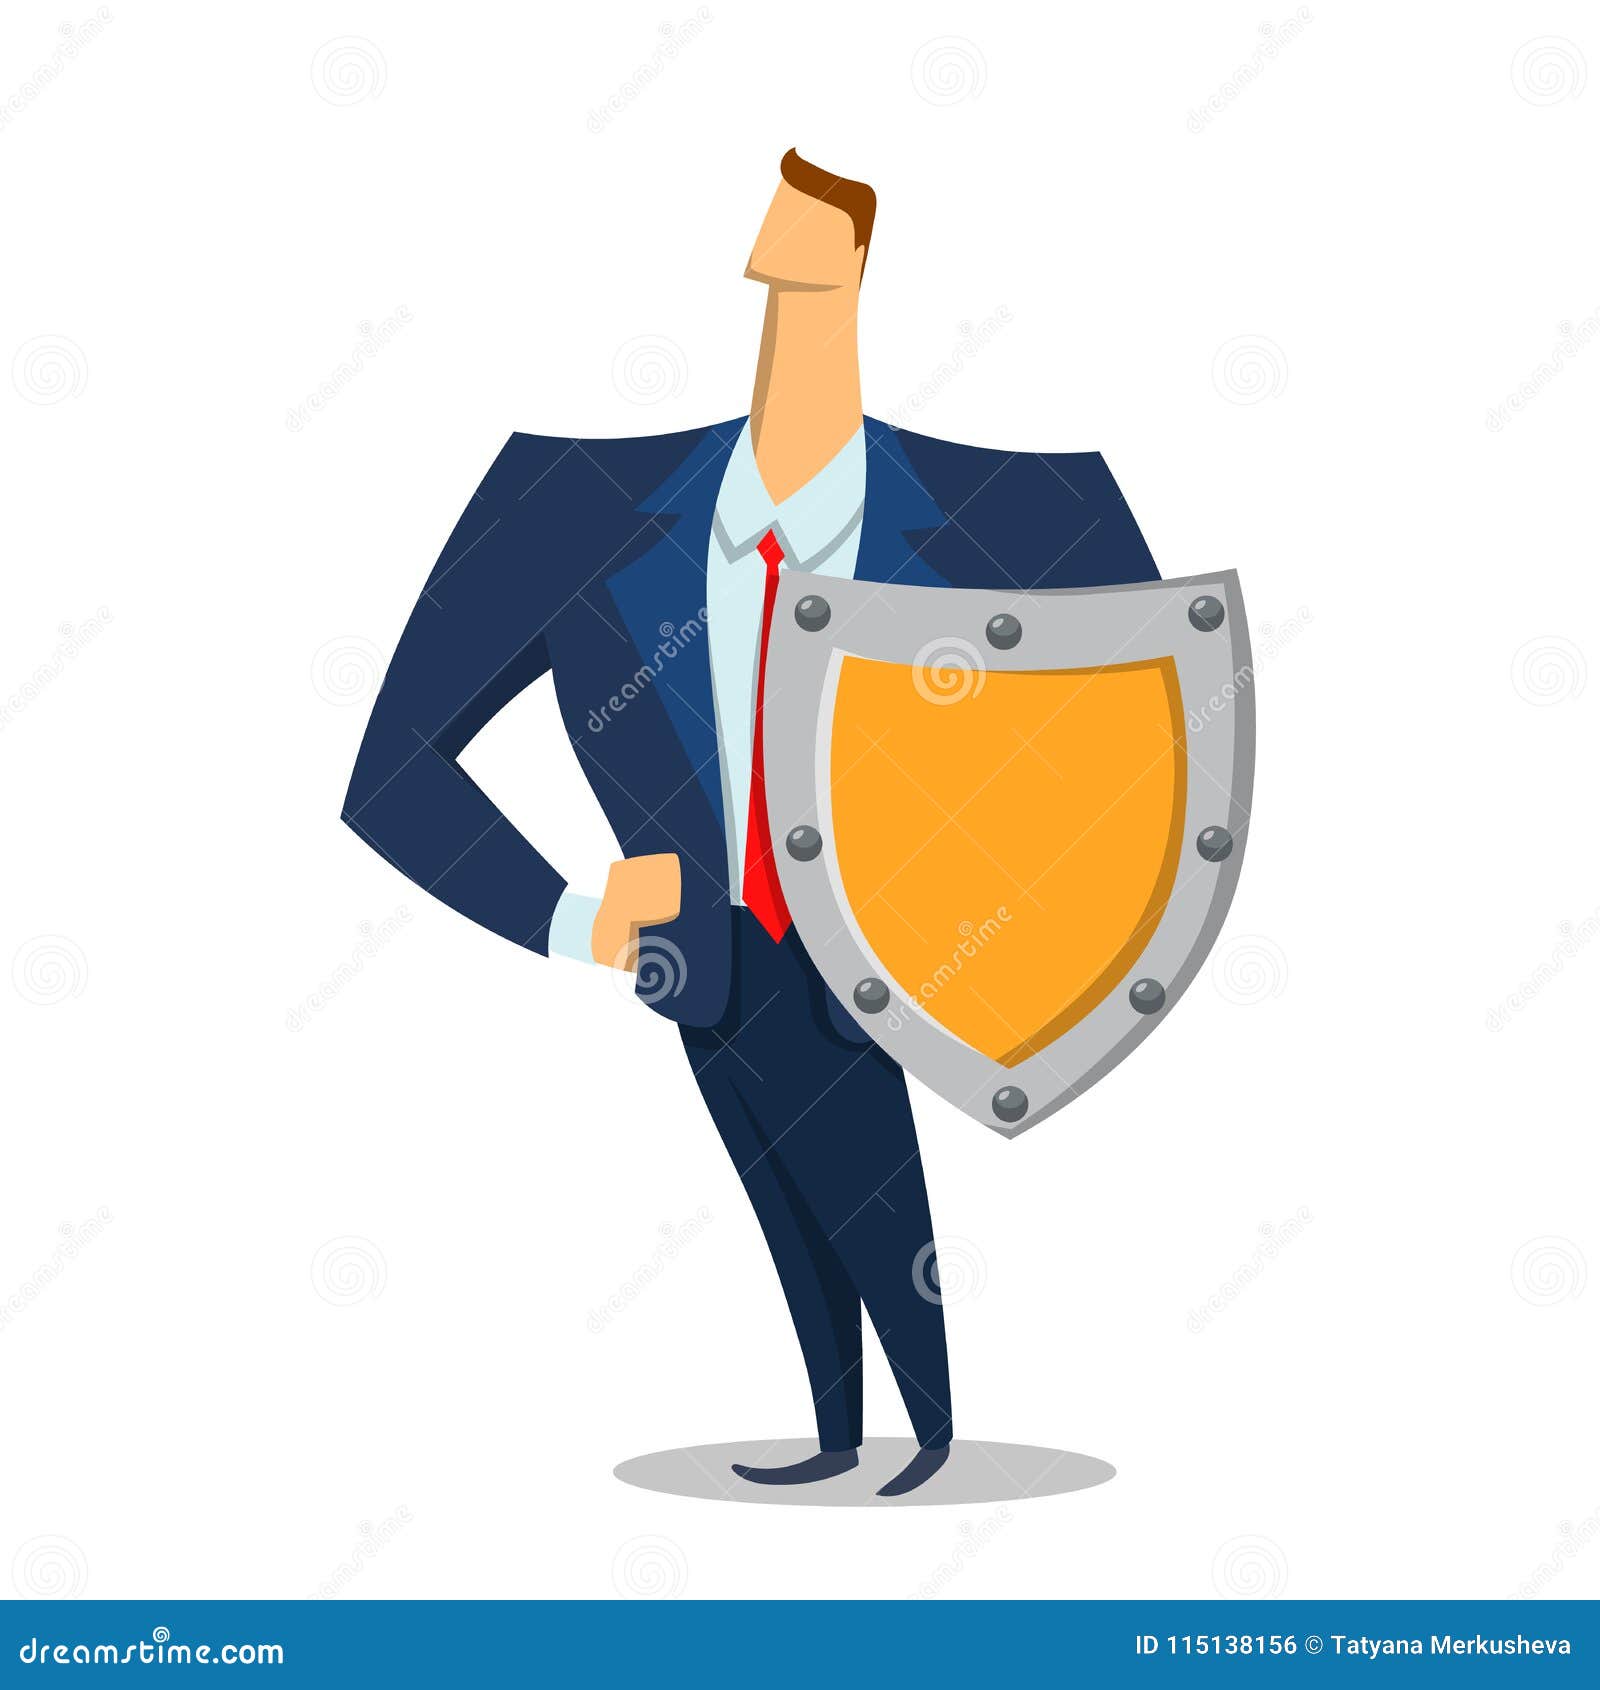 man in business suit with a shield looking forward. security and protection. protecting your personal data. gdpr, rgpd